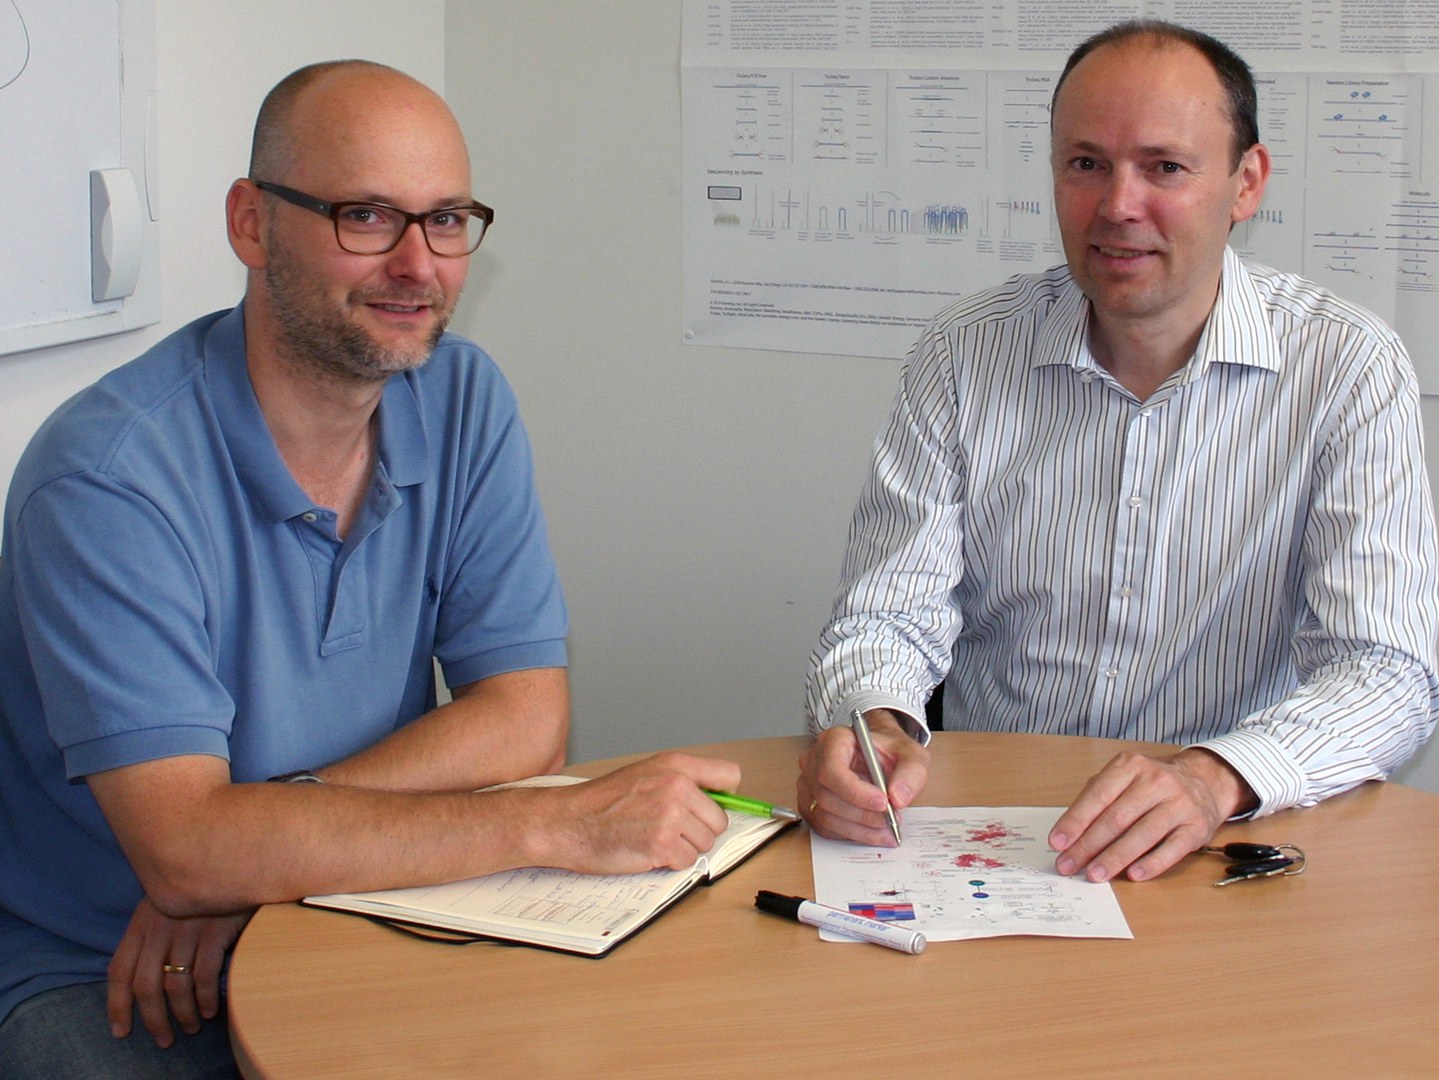 Prof. Dr. Joachim Schultze (right) and Dr. Marc Beyer,